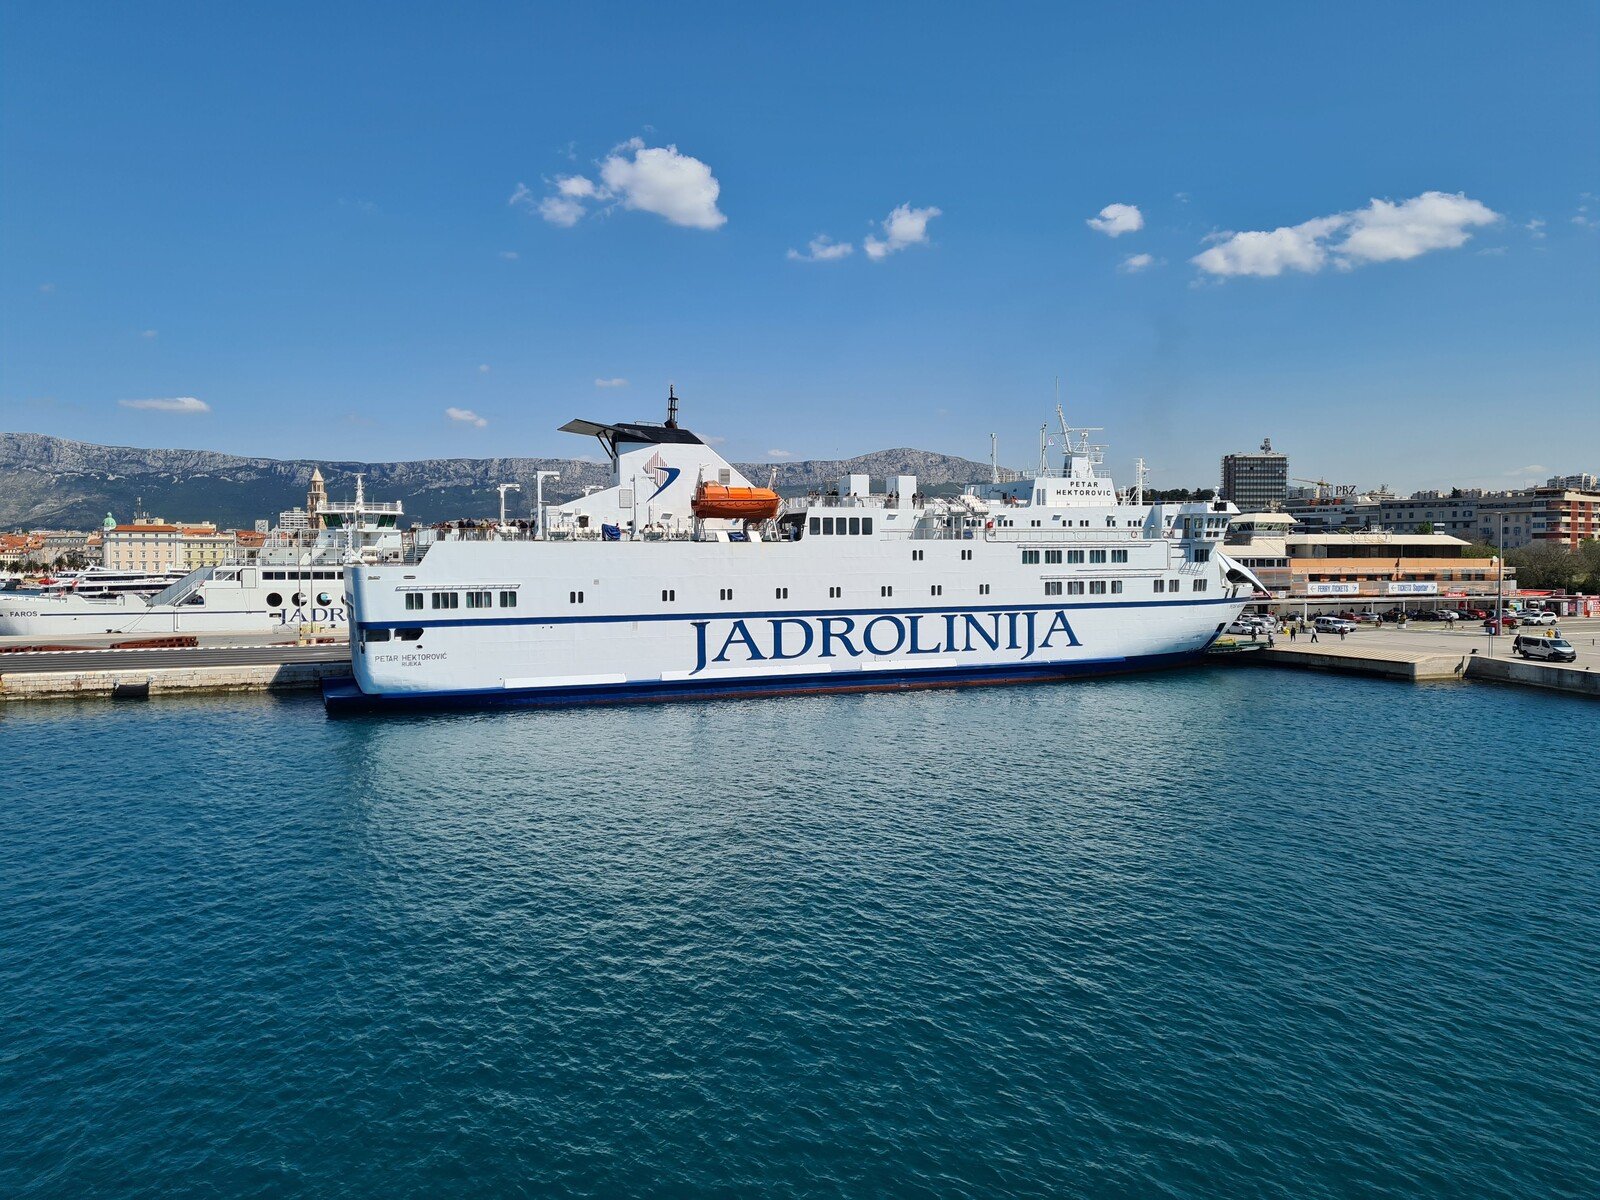 A large white ferry boat in the water docked at the port with blue writing that reads "Jadrolinija"